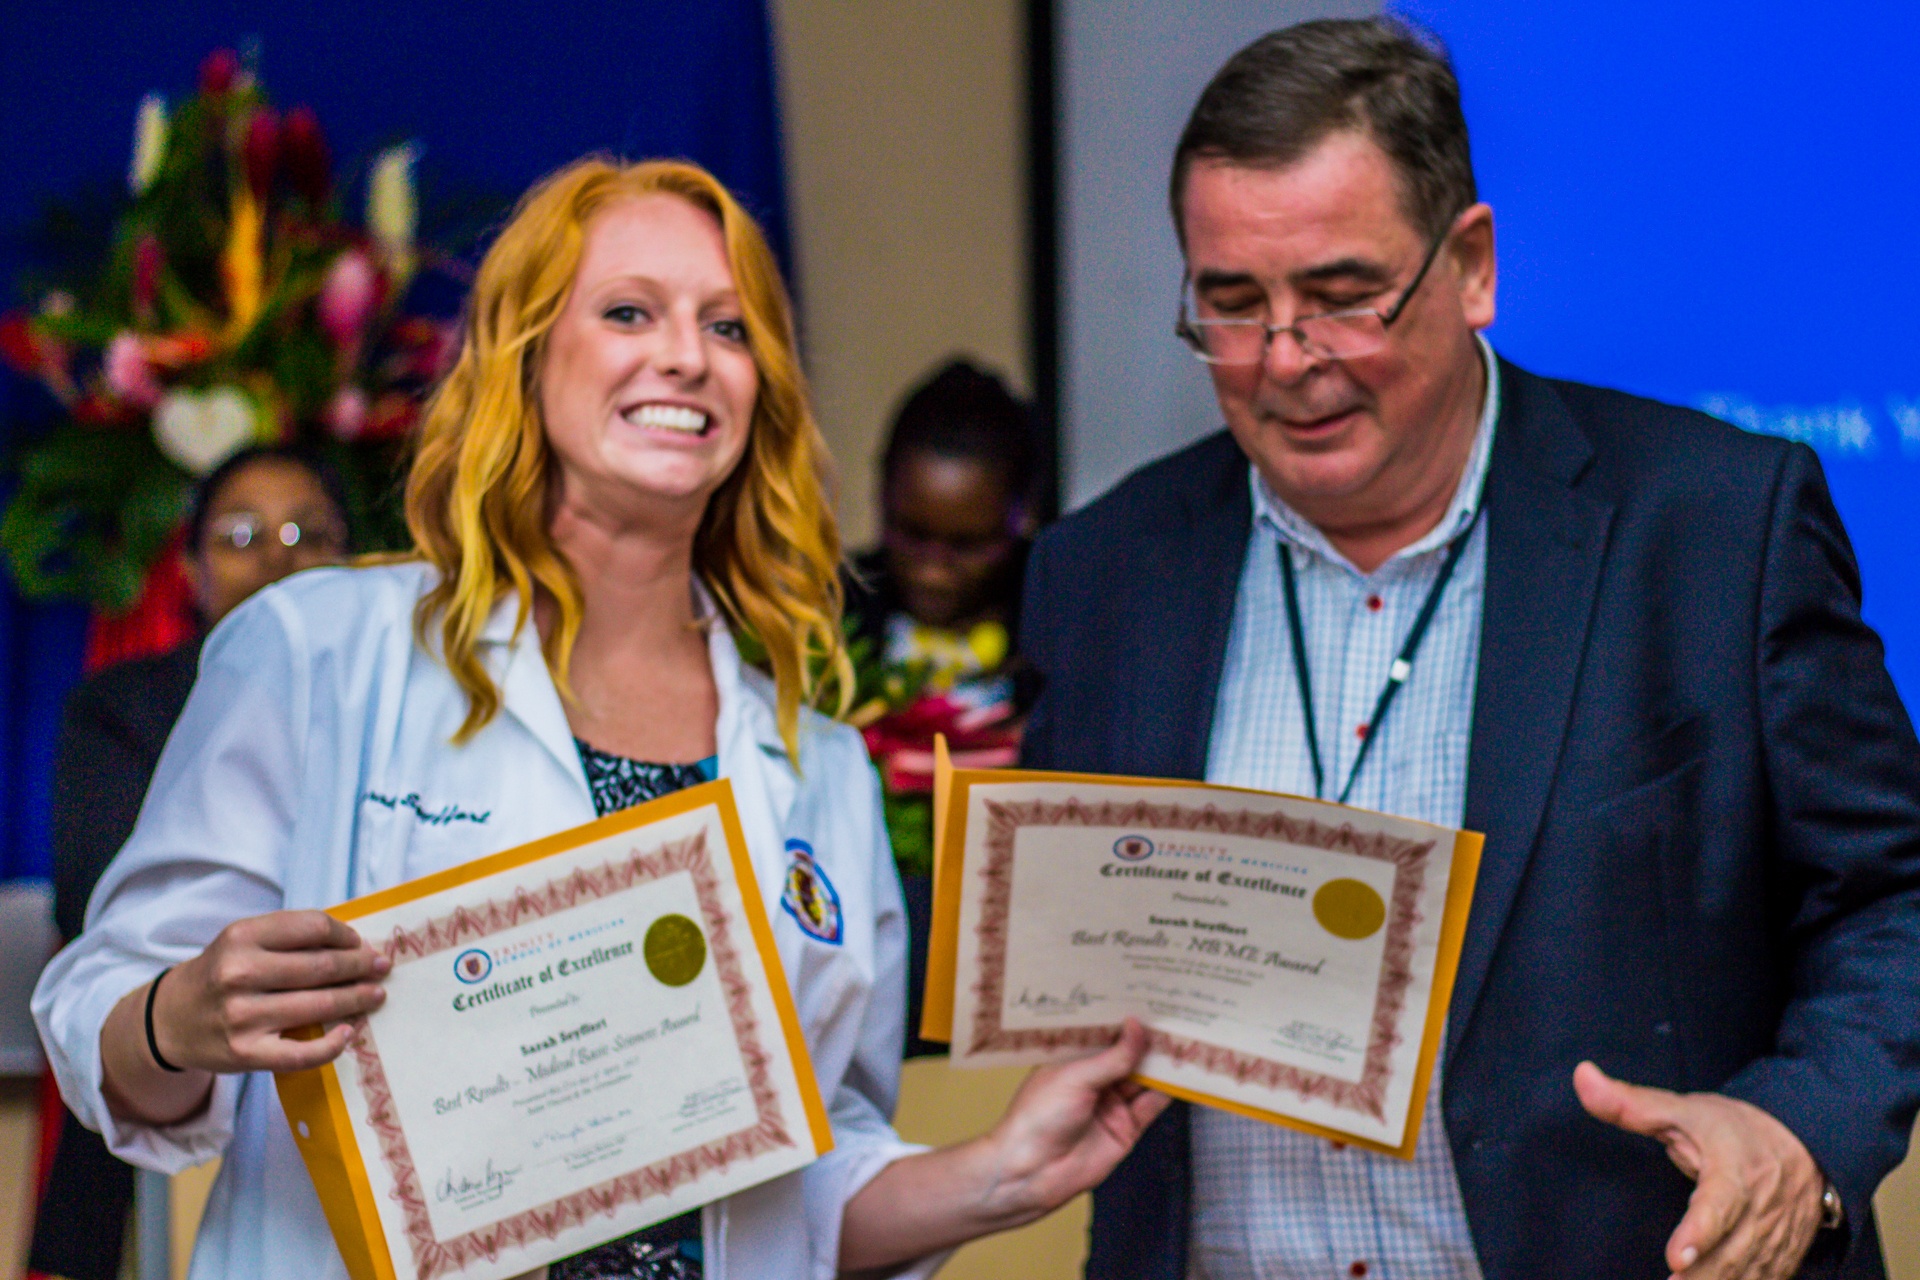 Dr. Andreas Reymann and Sarah Seyffert with her two awards